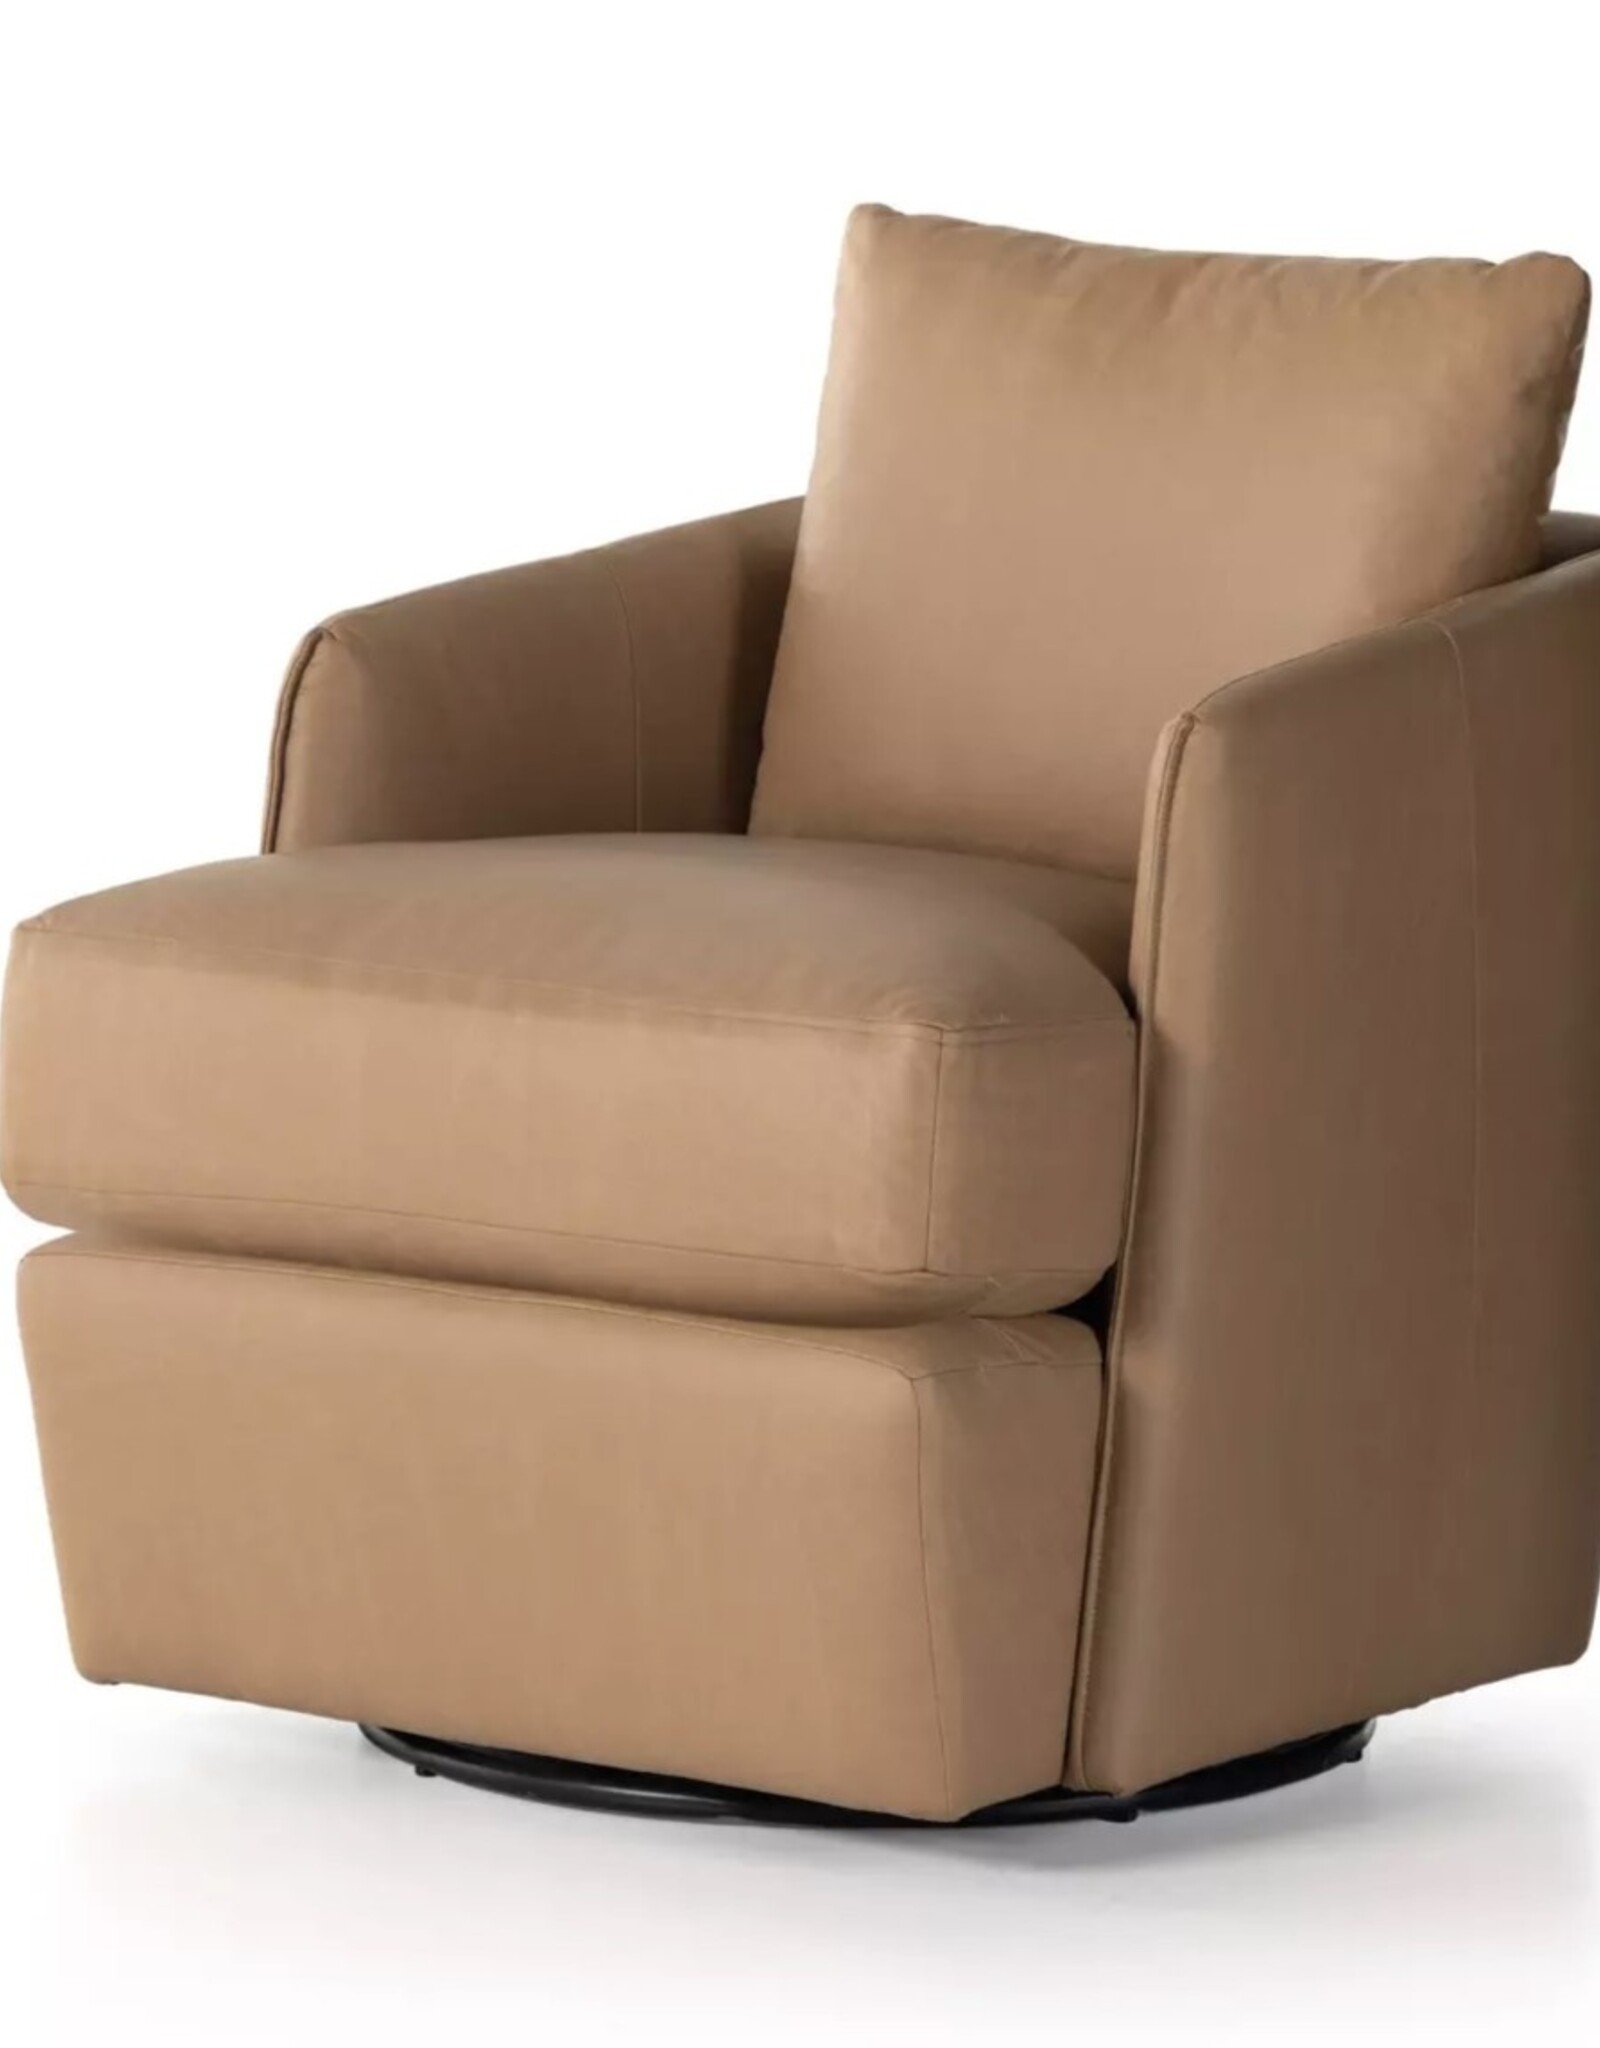 Whittaker Swivel Chair in Nantucket Taupe Leather